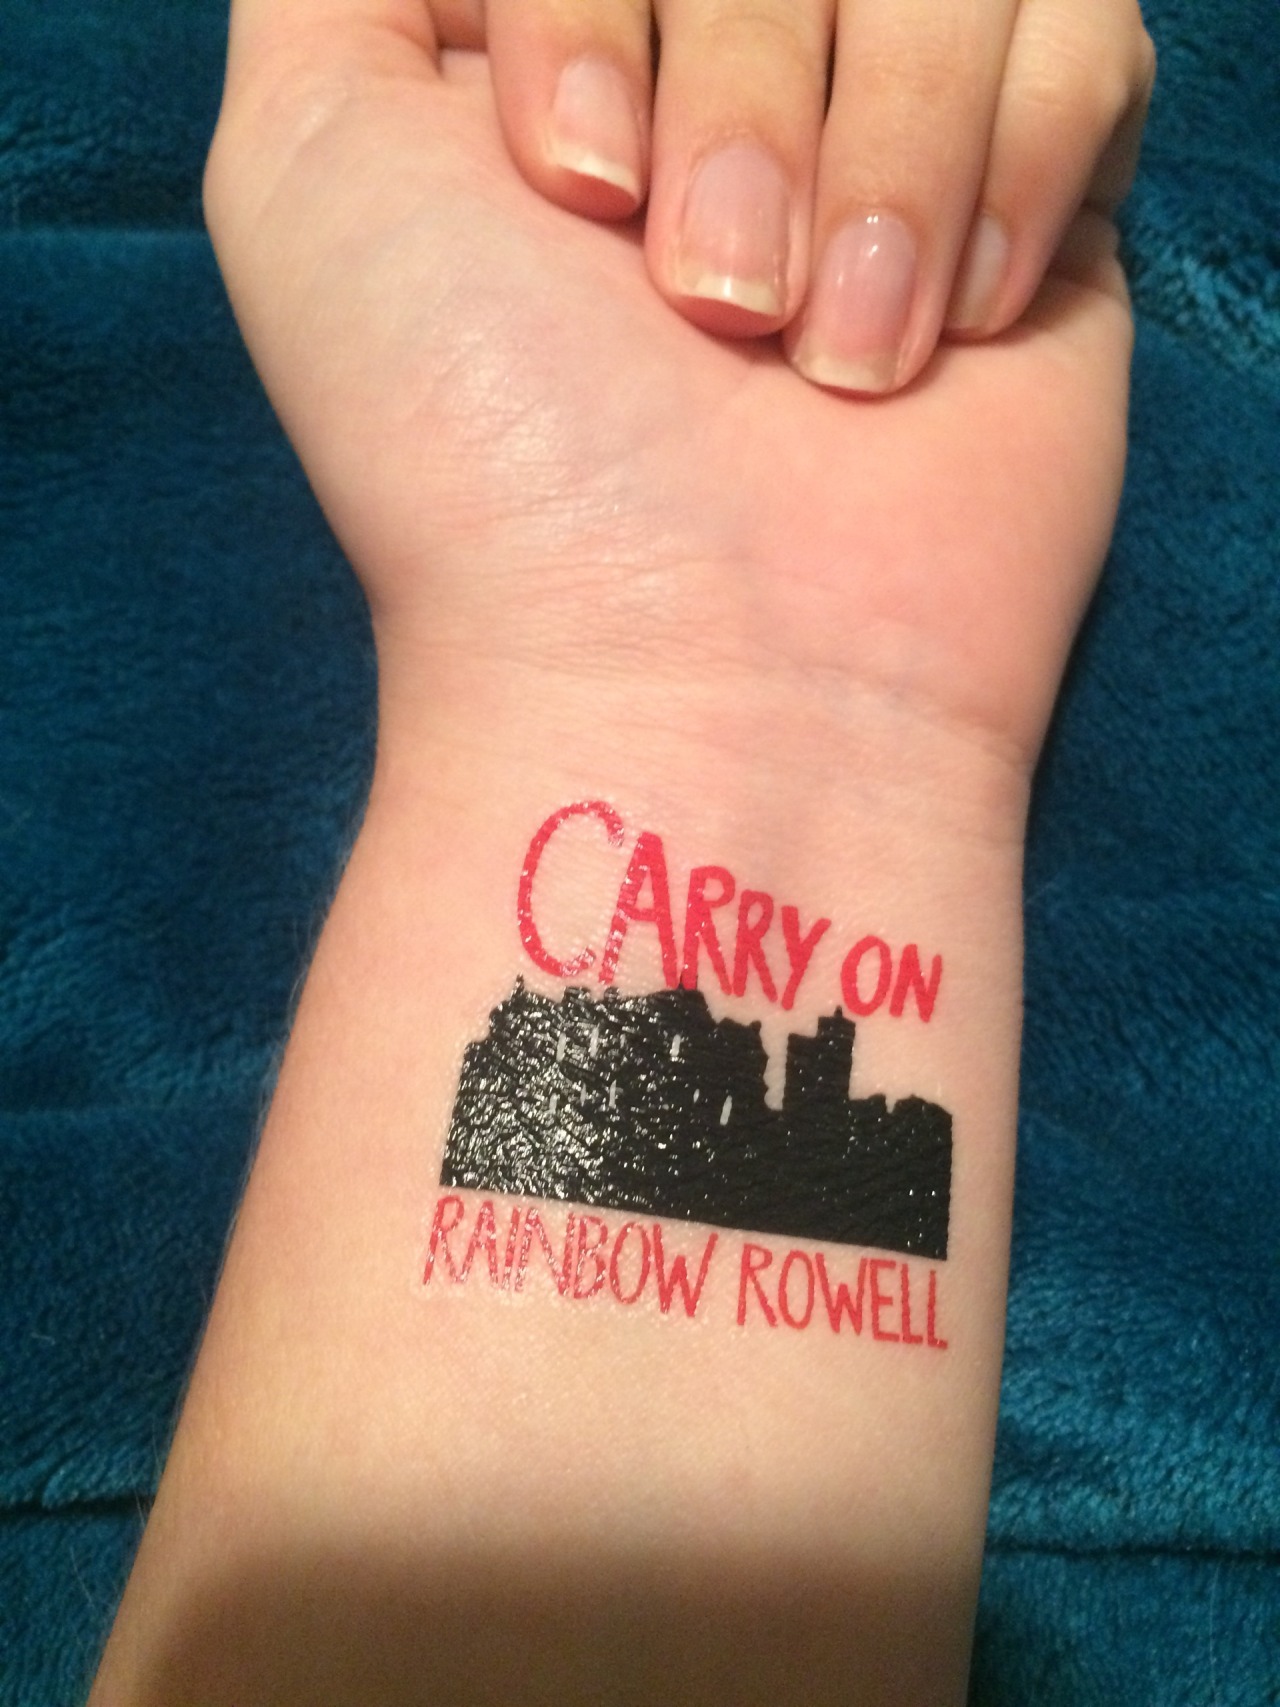 Keep calm and carry on tattoo on the right thigh